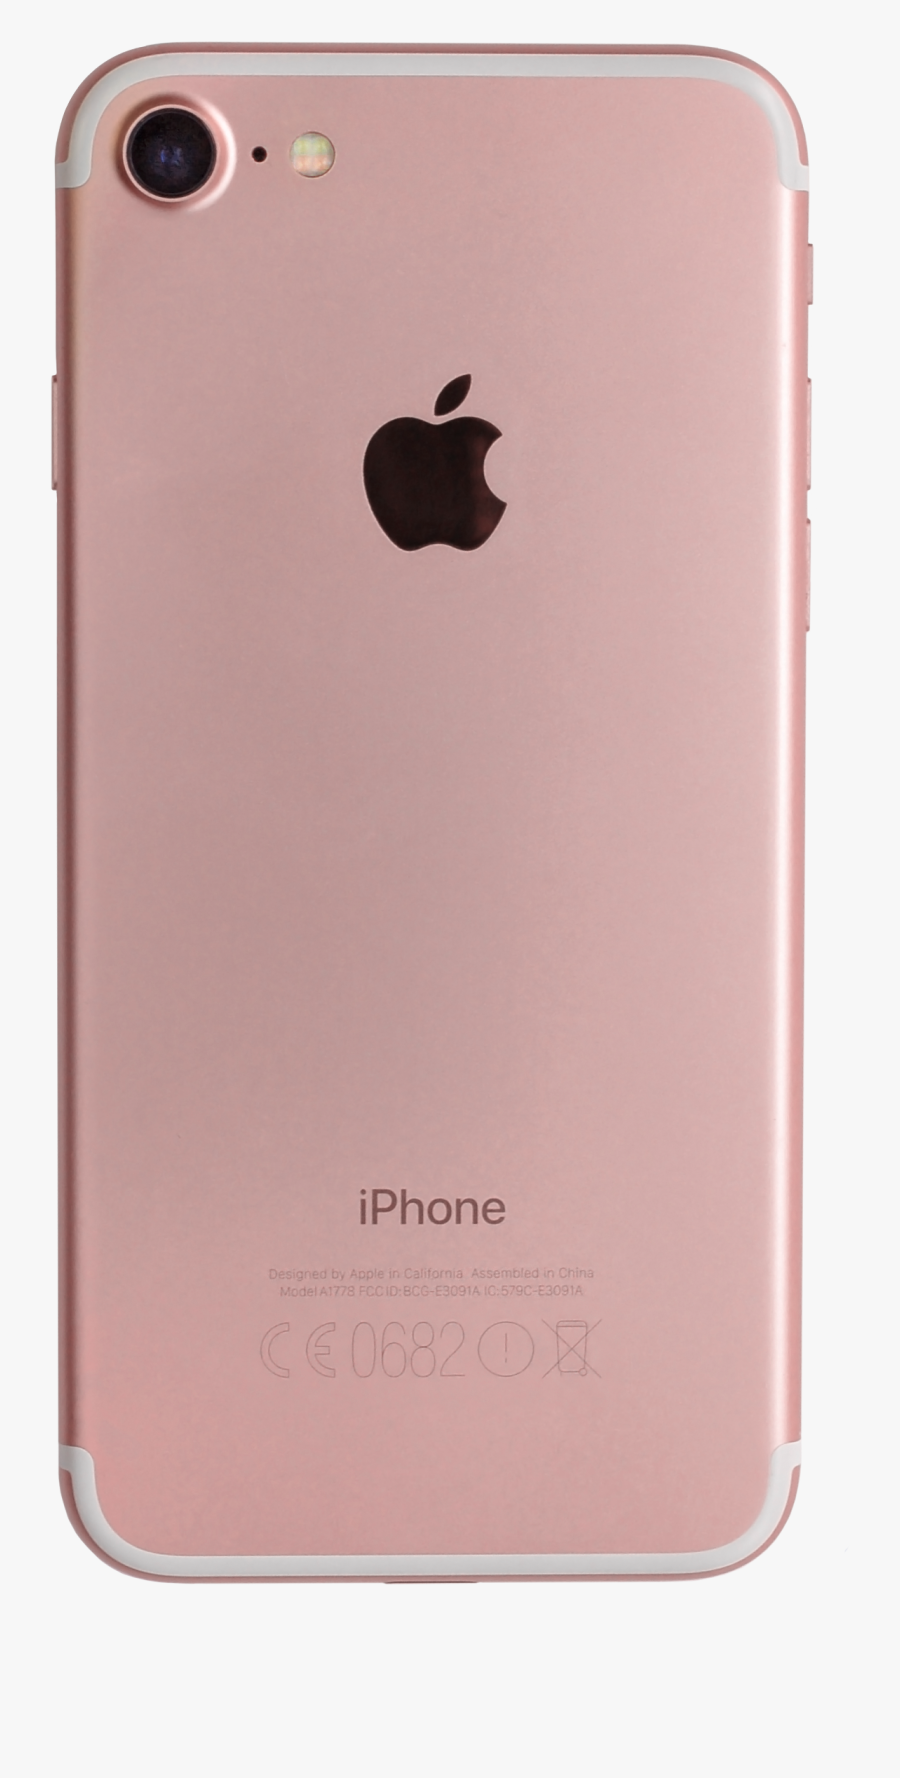 File A Back Retouch - Iphone 7 Rosegold Png, Transparent Clipart